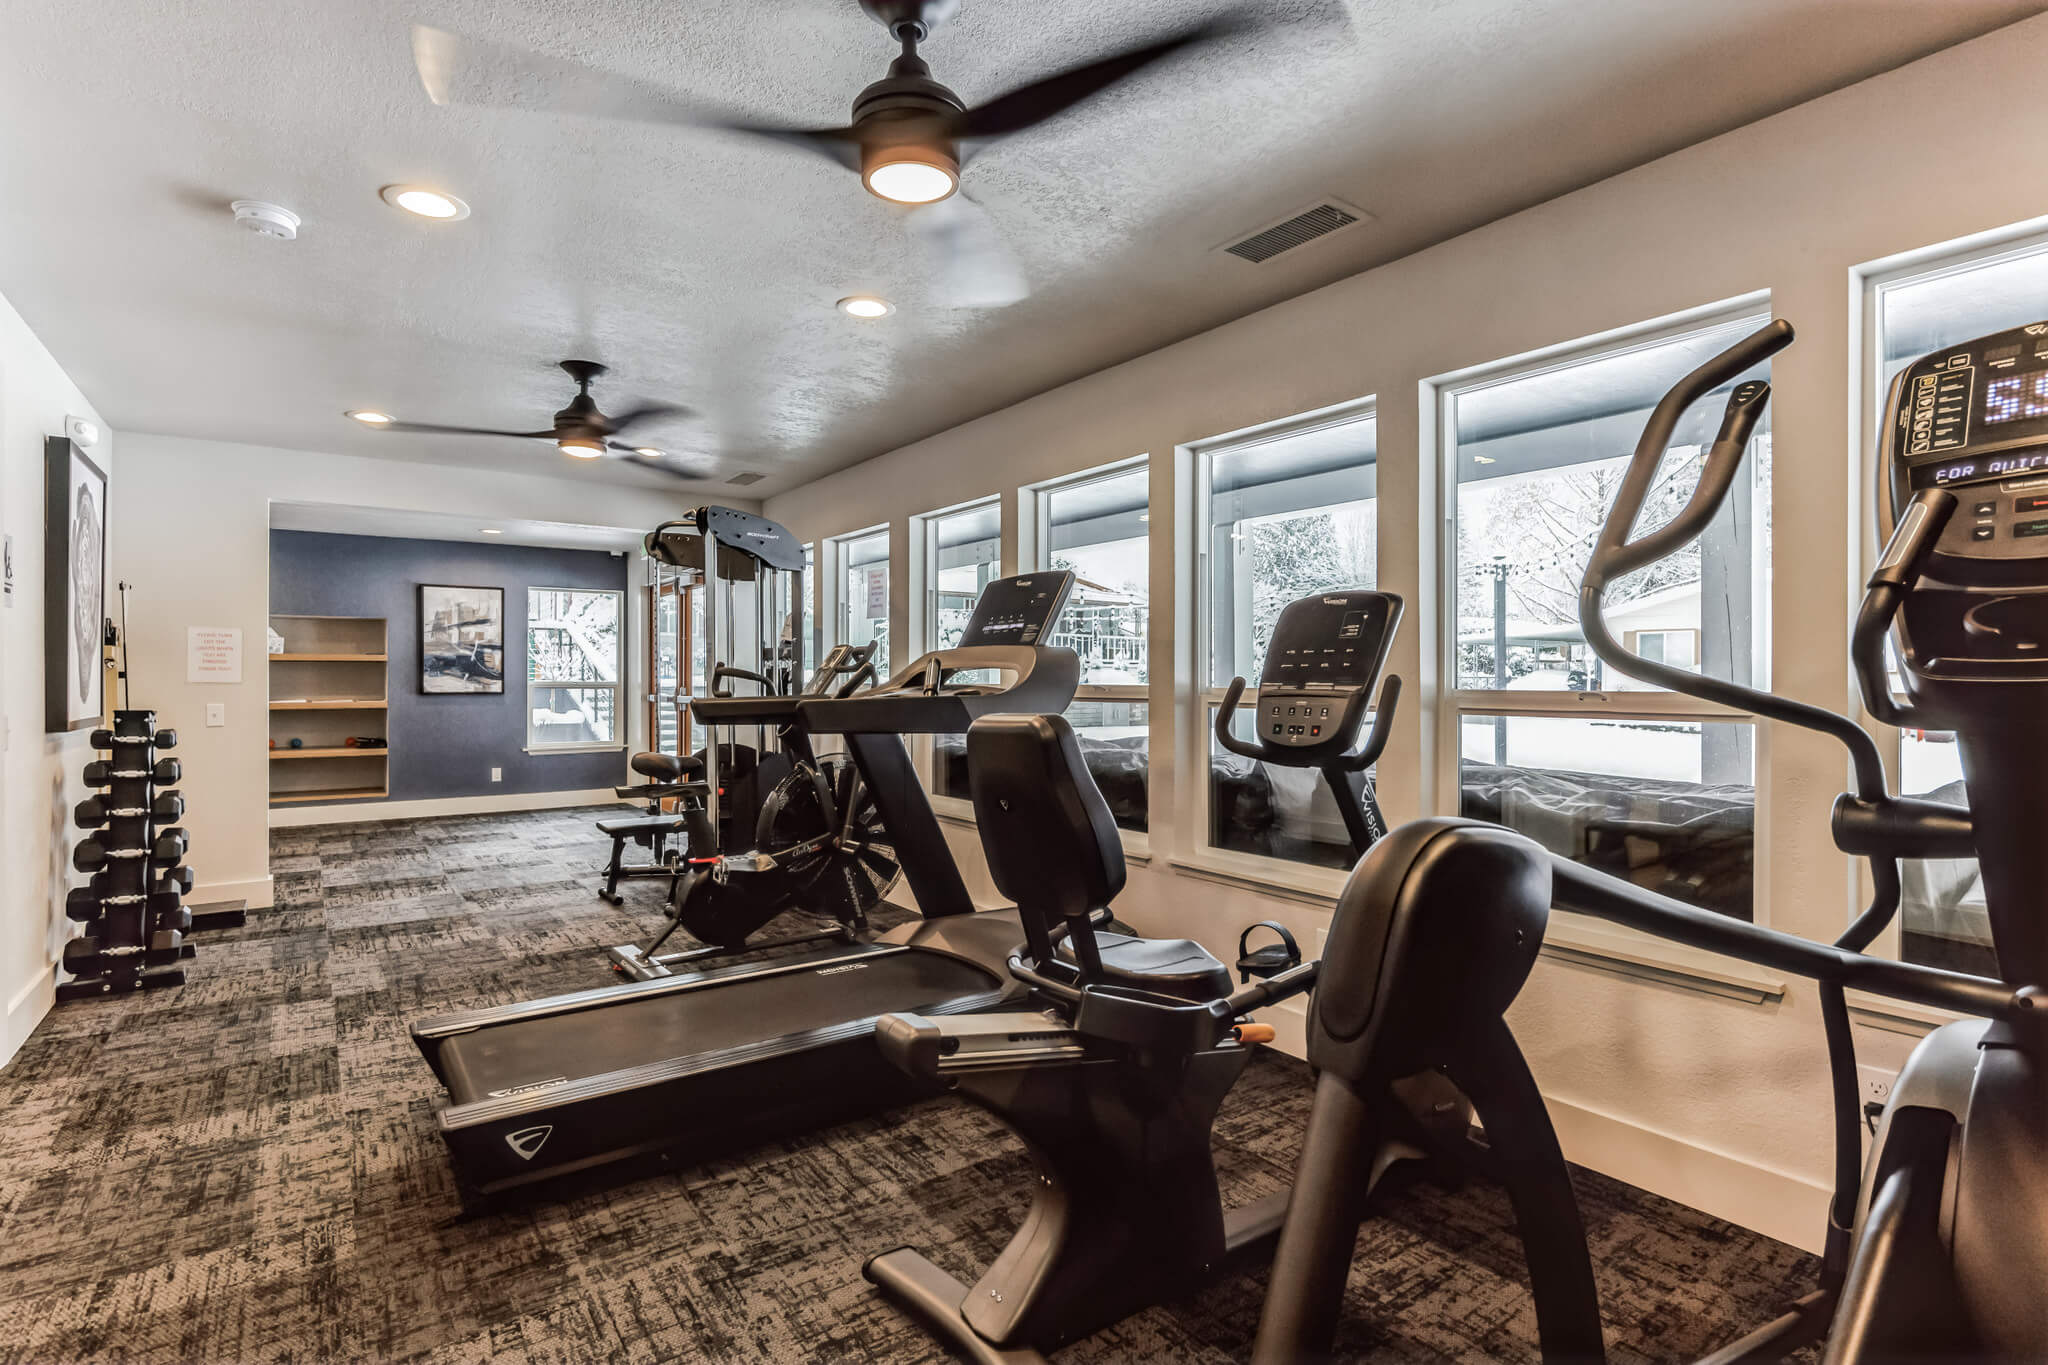 Manufactured homes community fitness center with glass window and quality gym equipment.